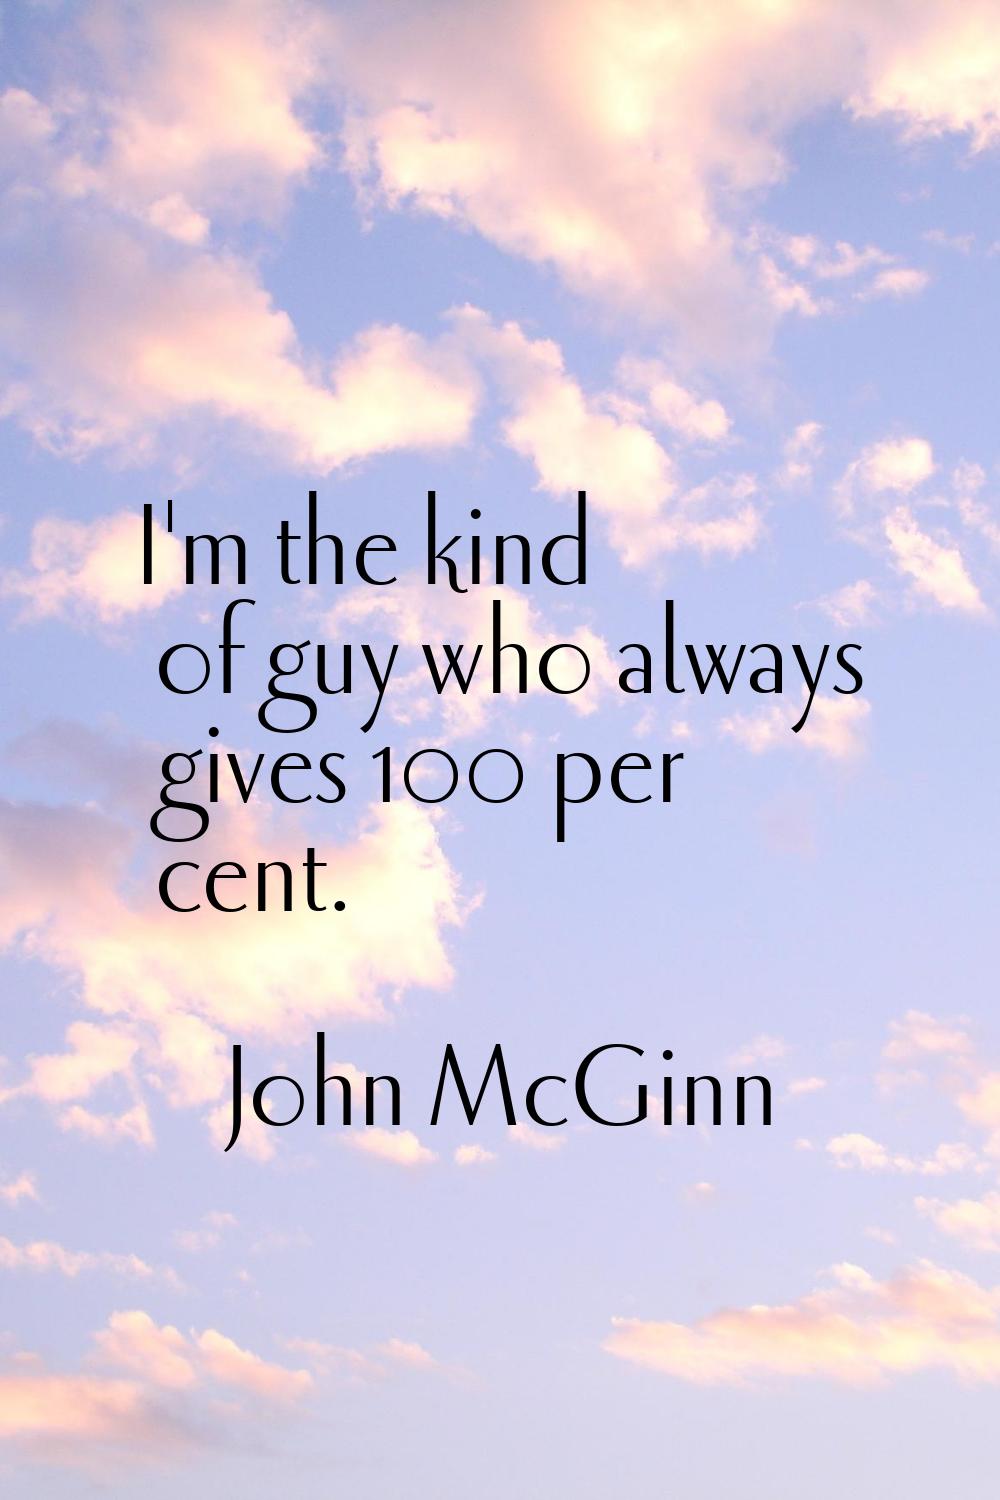 I'm the kind of guy who always gives 100 per cent.